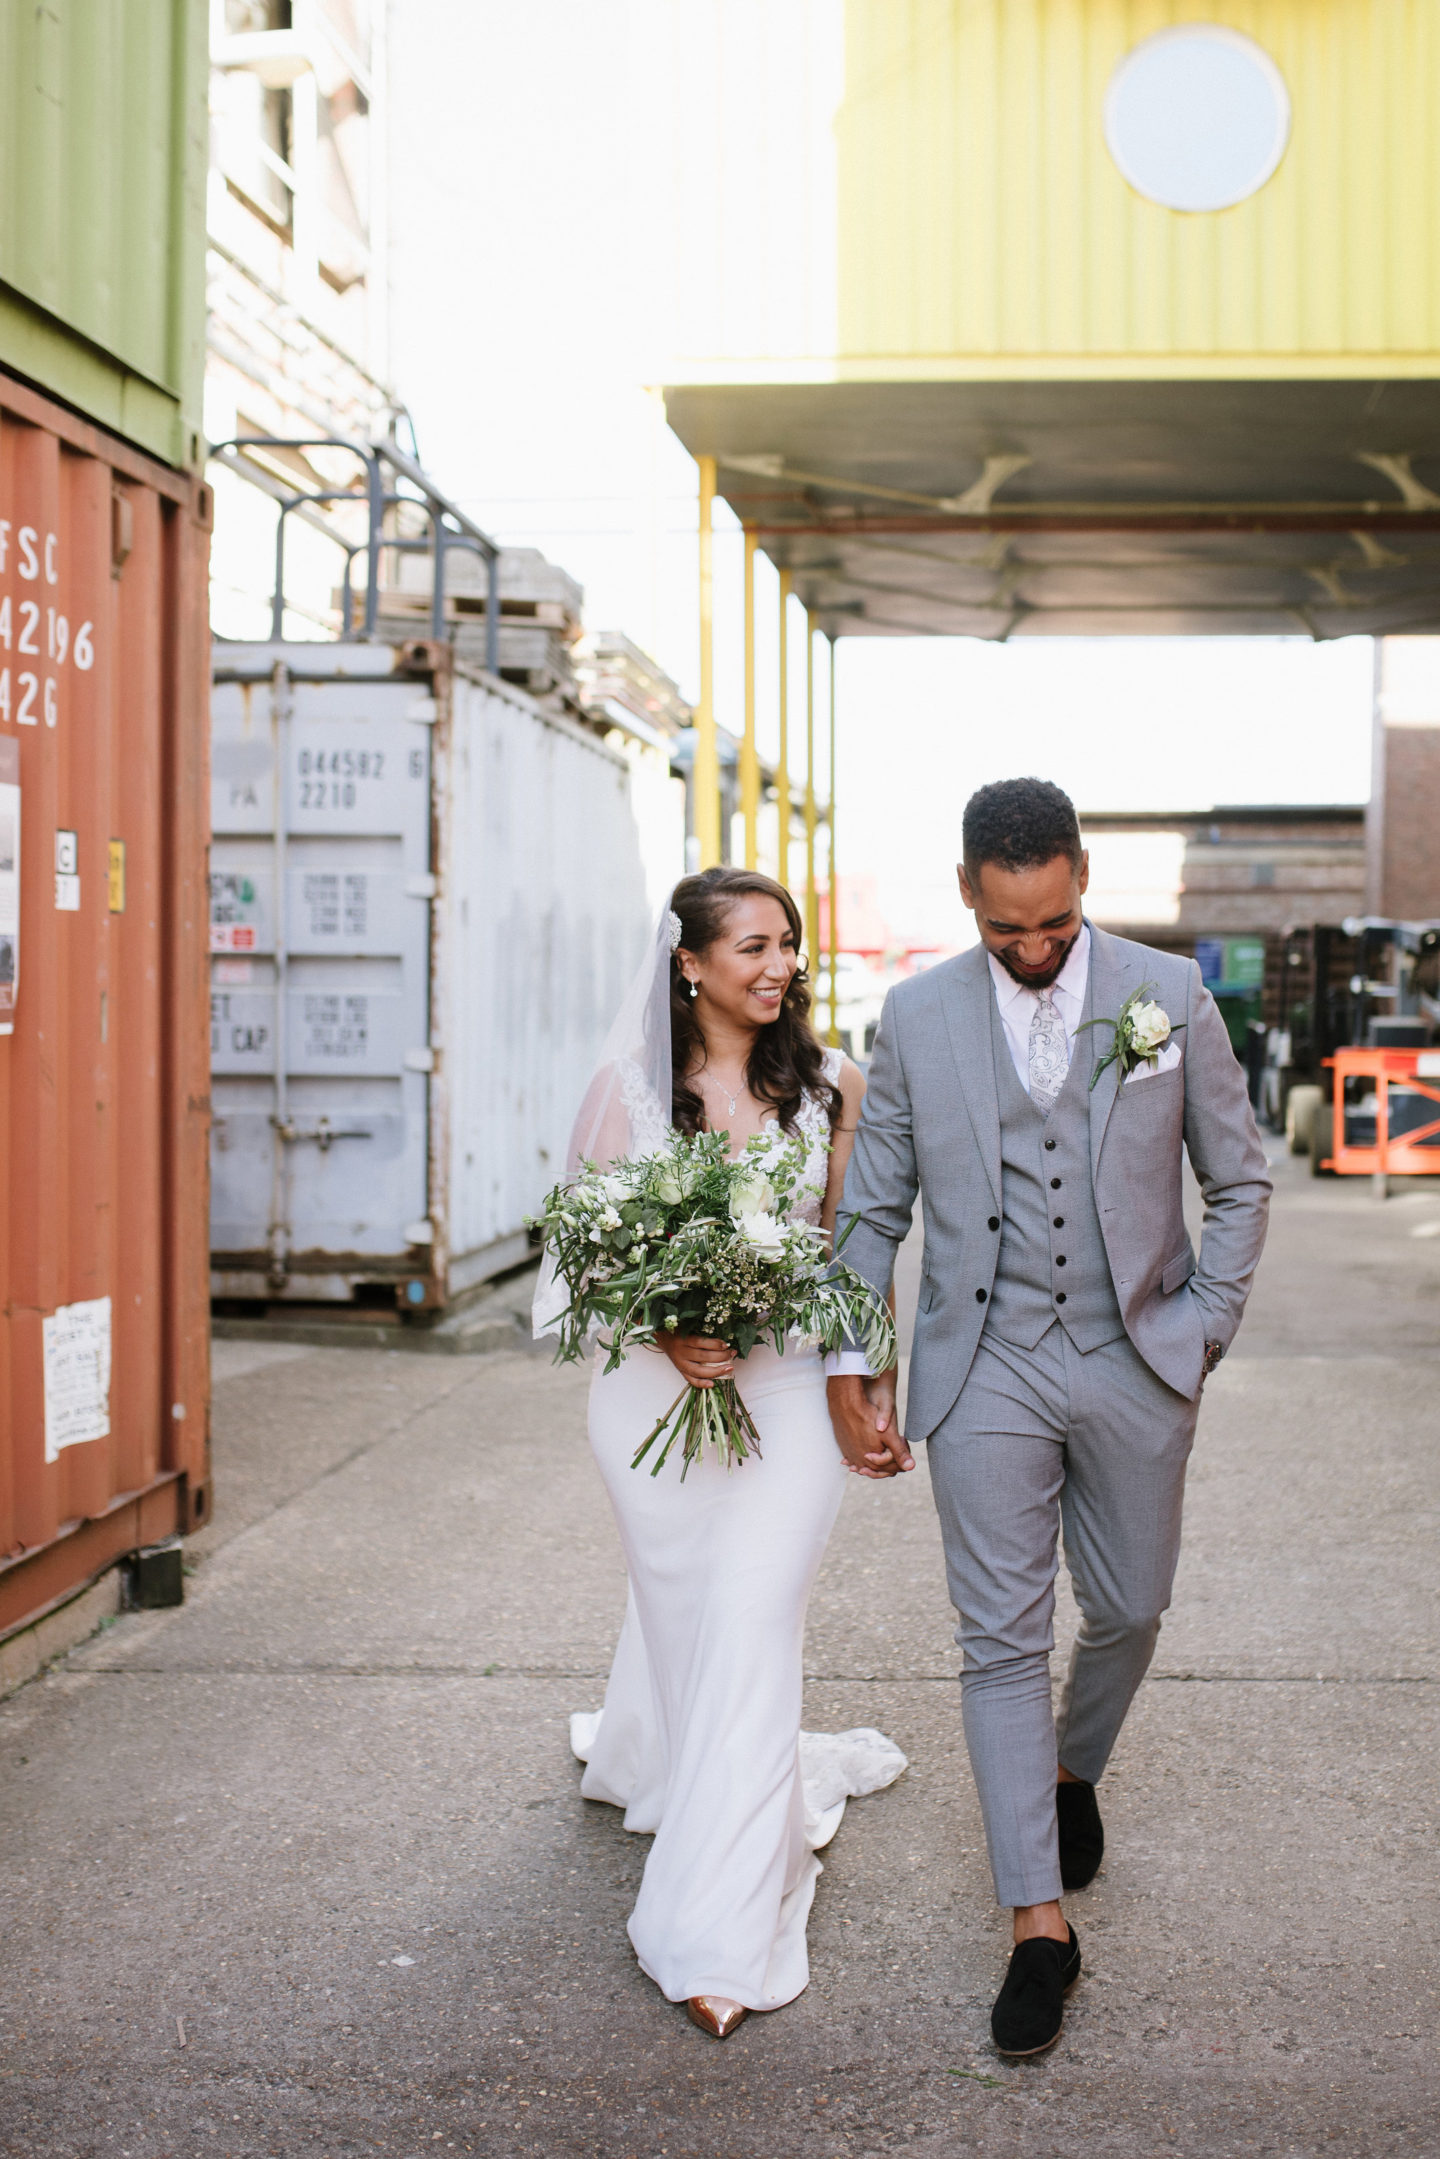 Industrial wedding outfits bride and groom